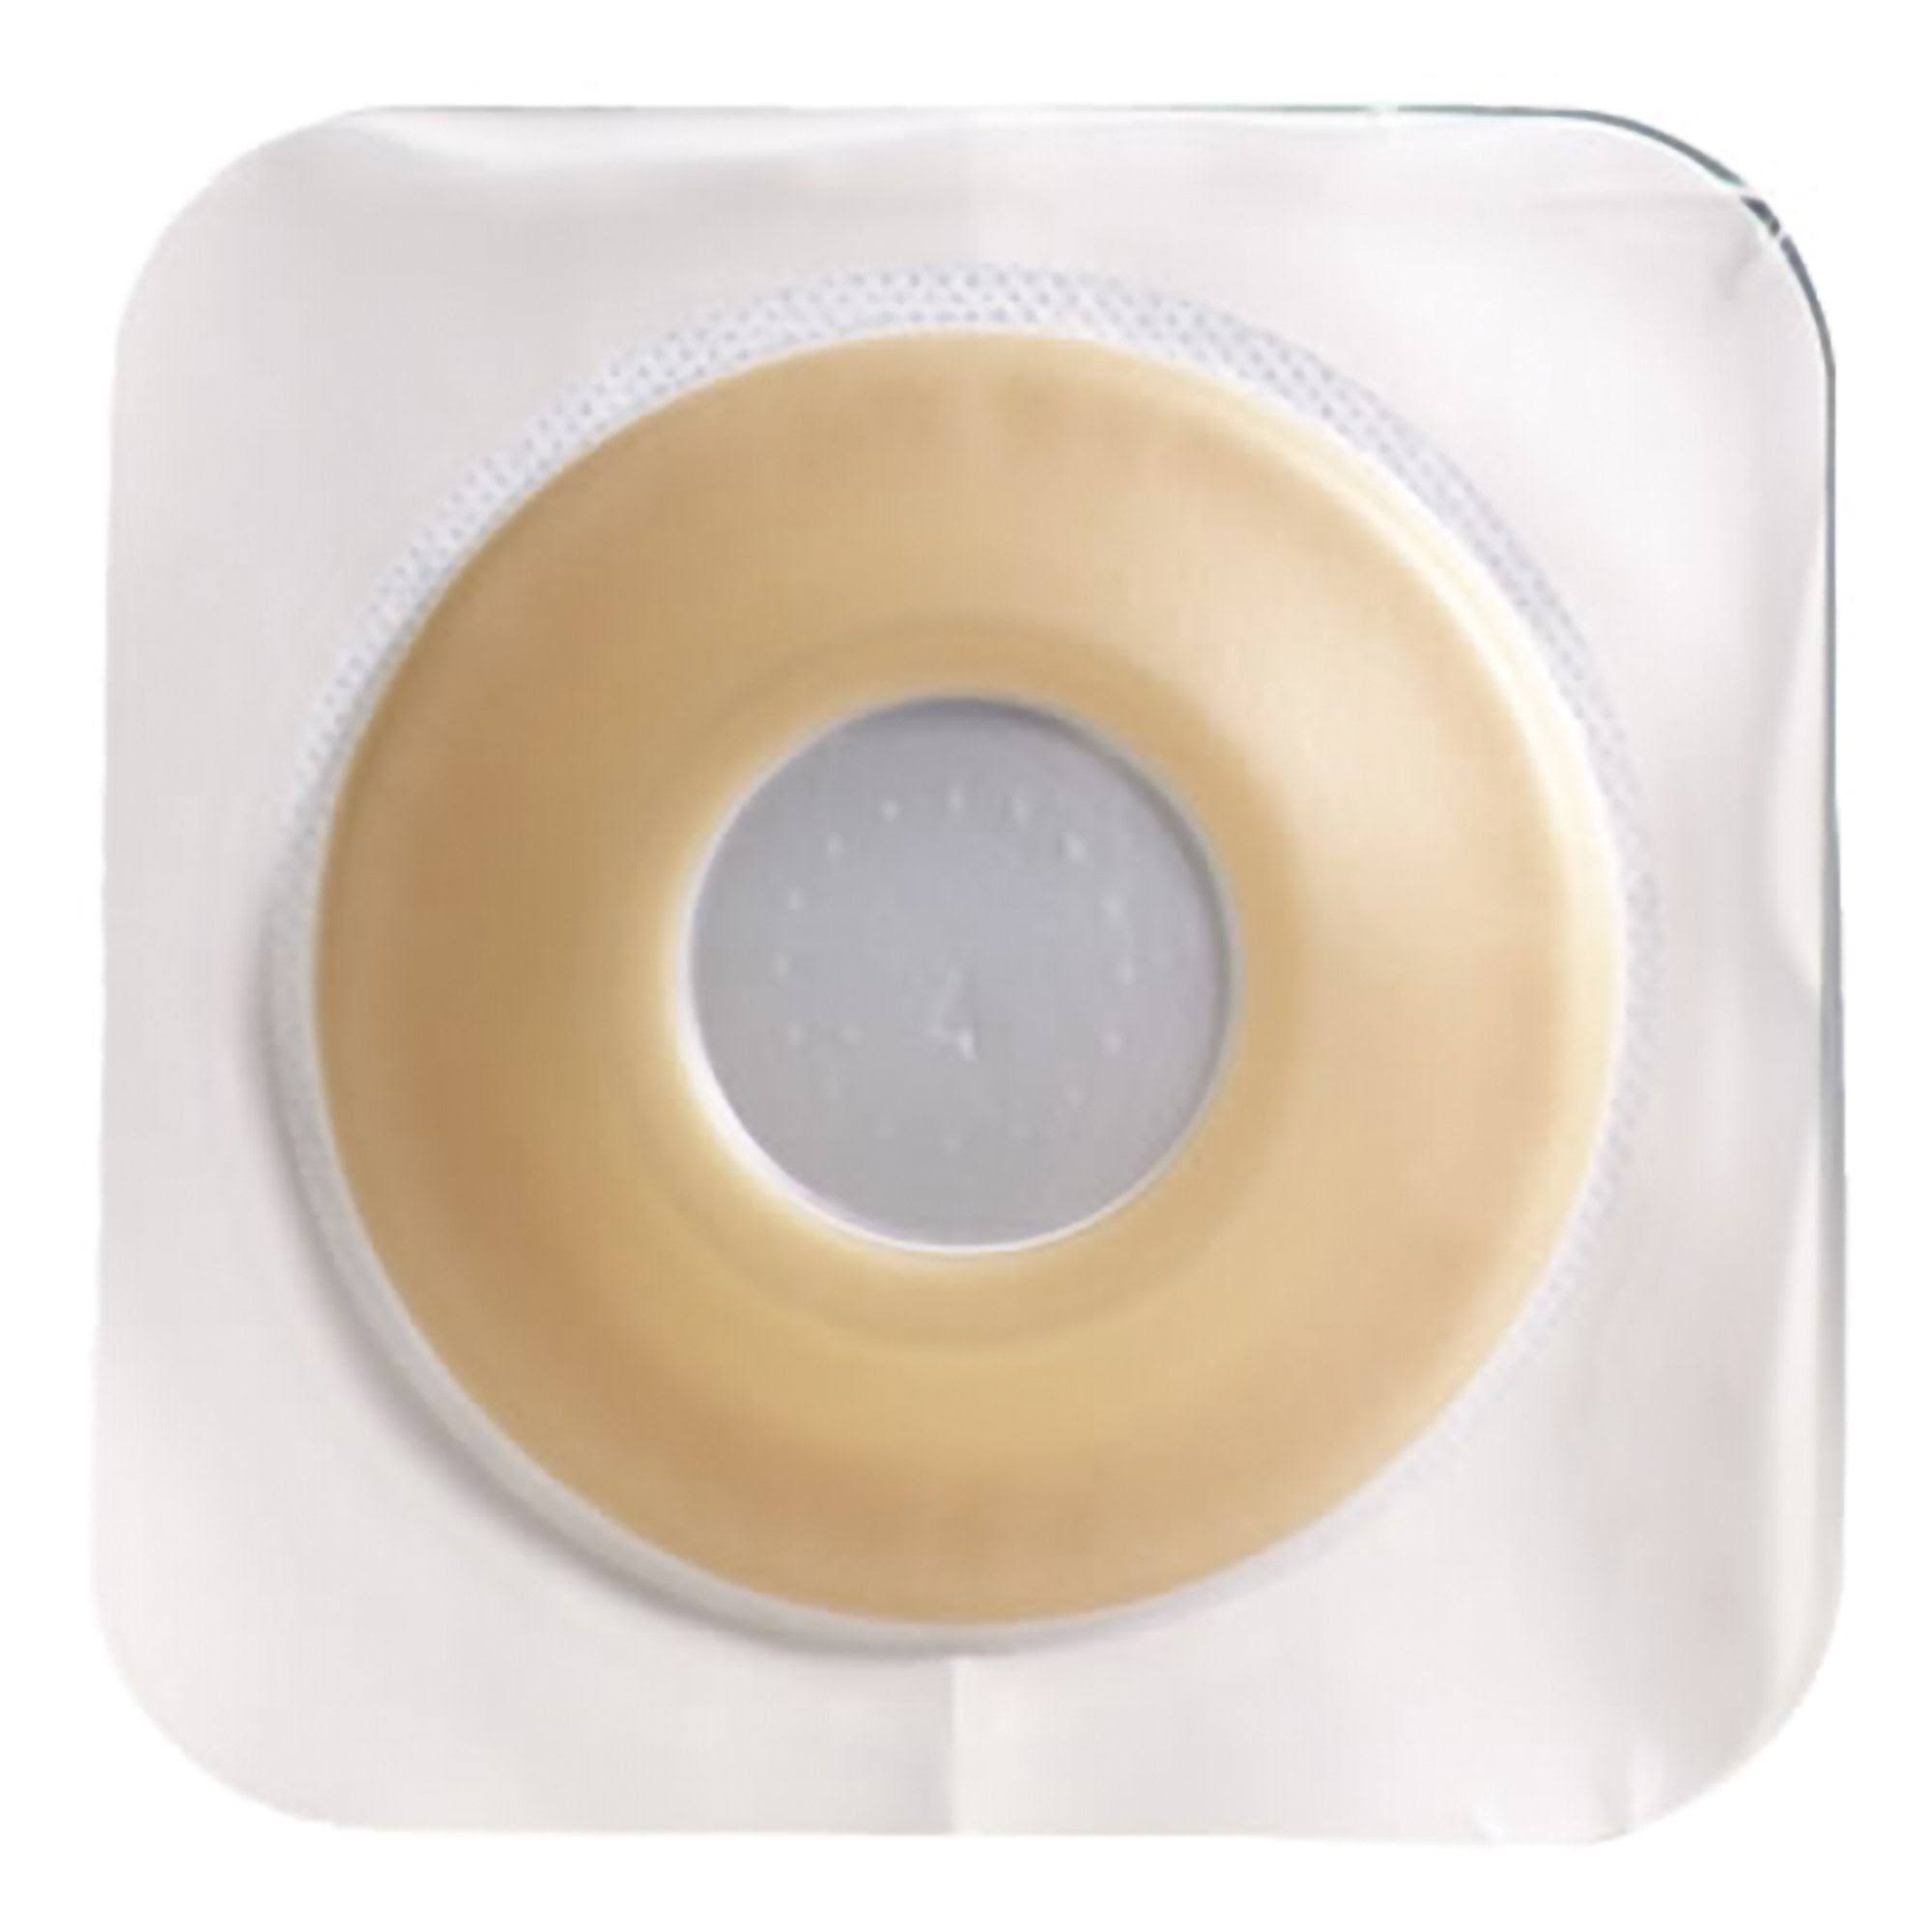 ConvaTec Sur Fit Natura Durahesive Wafer with Convex It - 1 3/4" Flange 1 1/4" Stoma White